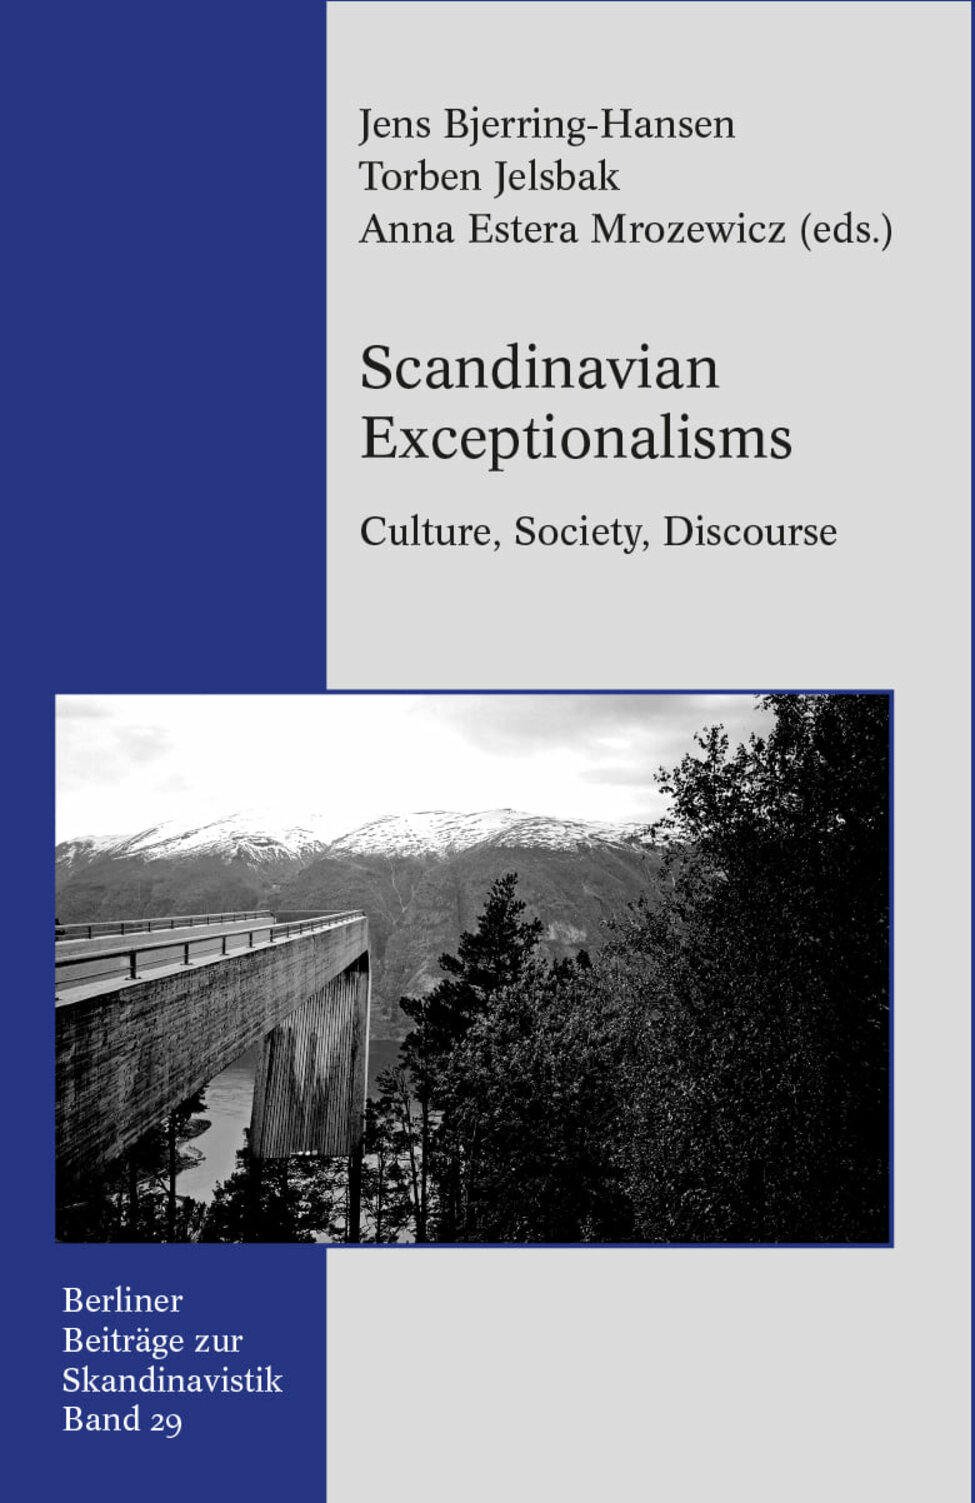 The book cover of "Scandinavian Exceptionalisms"